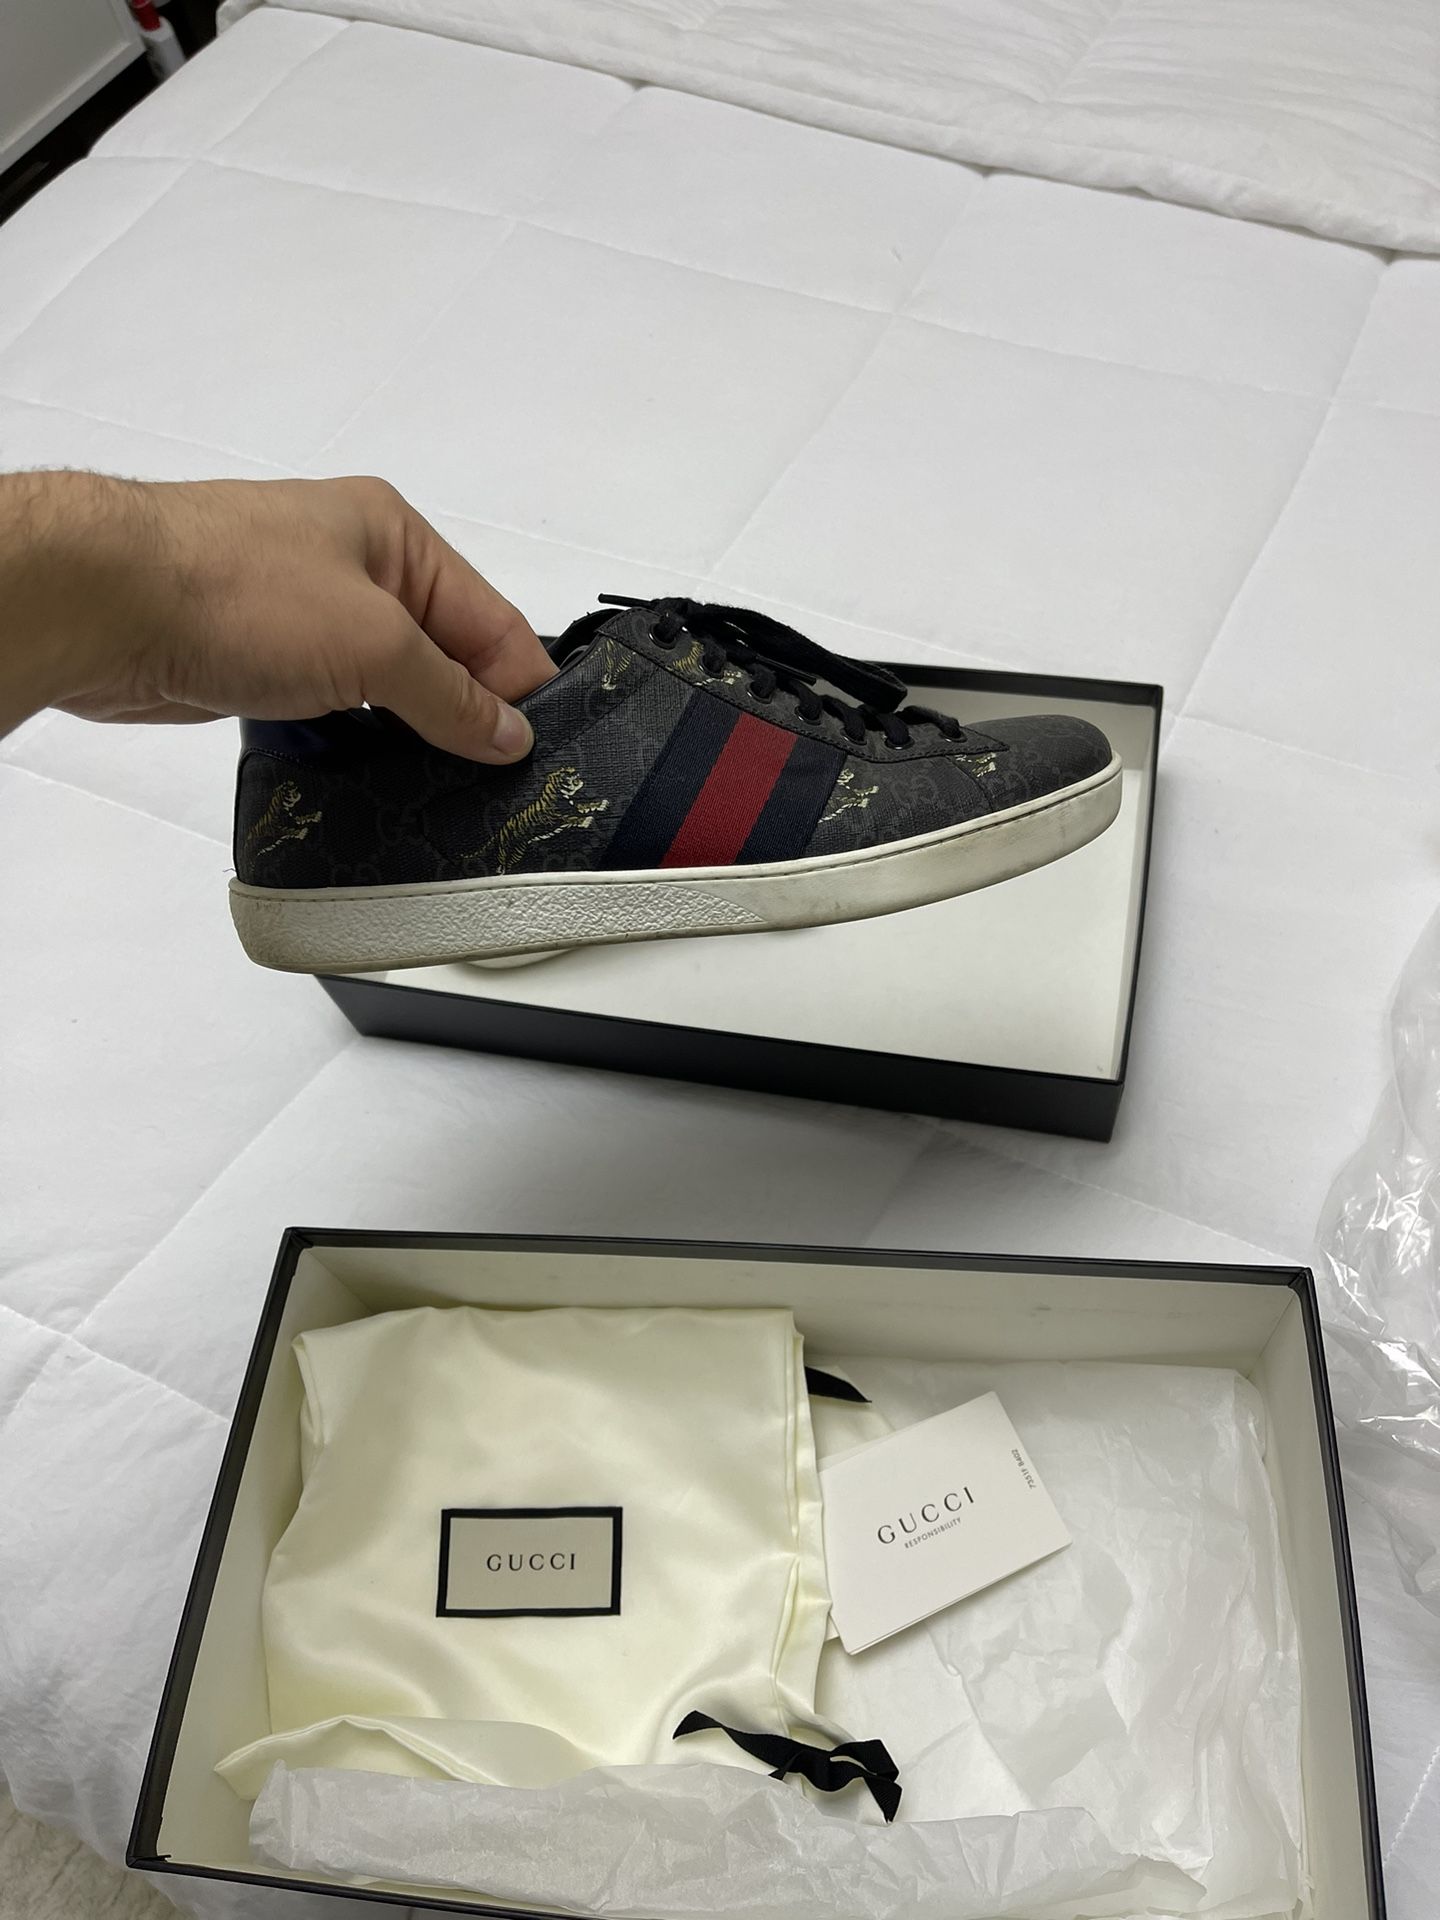 Gucci Sneakers 8.5